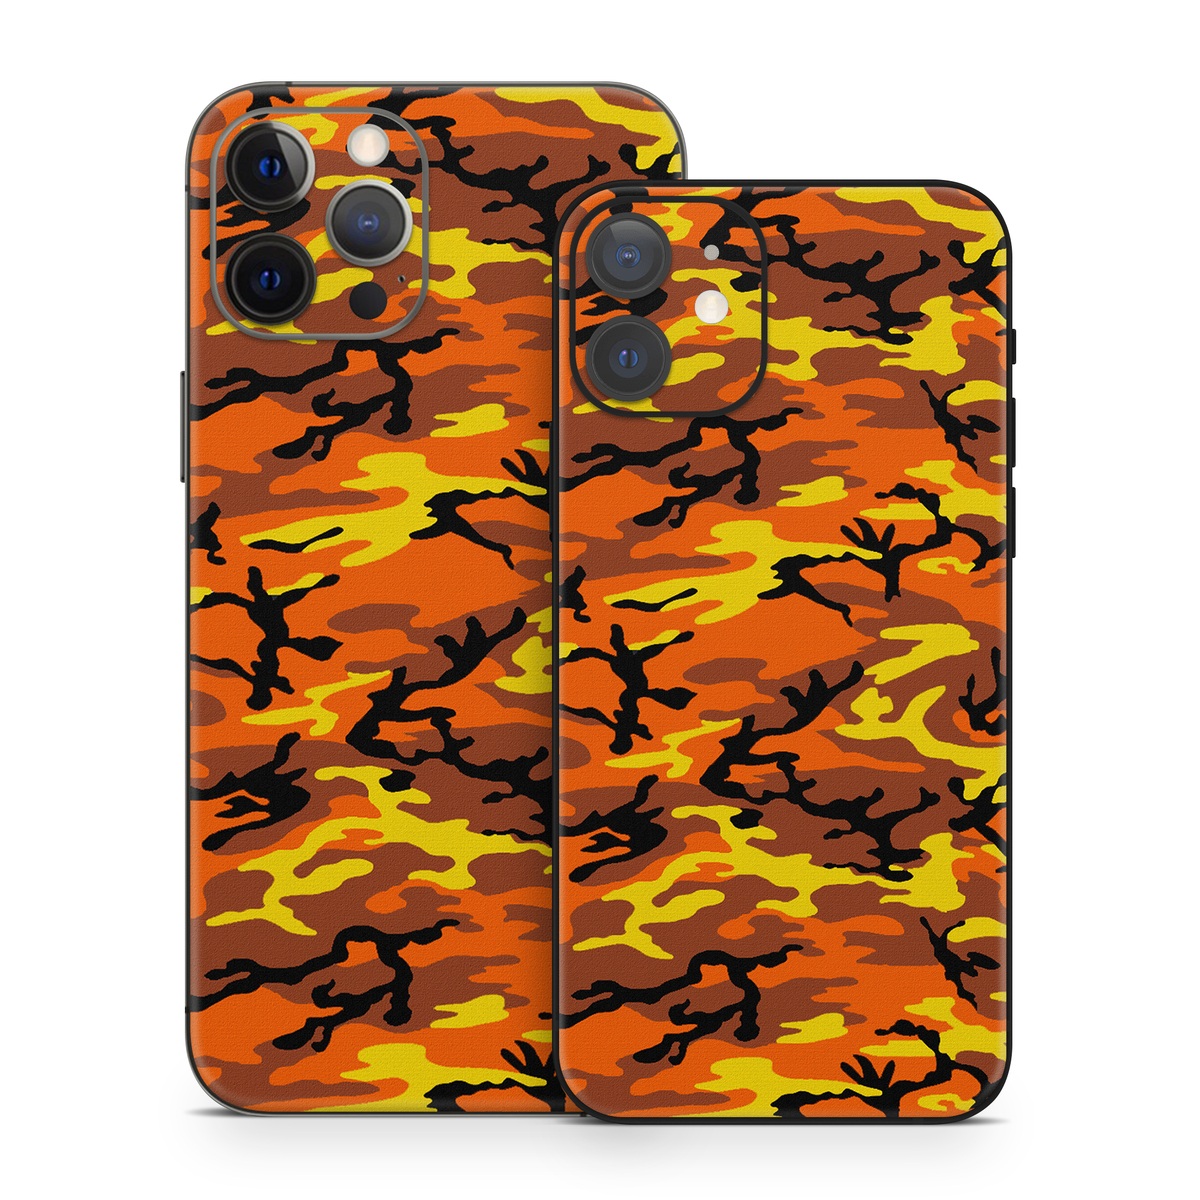 iPhone 12 Skin design of Military camouflage, Orange, Pattern, Camouflage, Yellow, Brown, Uniform, Design, Tree, Wildlife with red, green, black colors